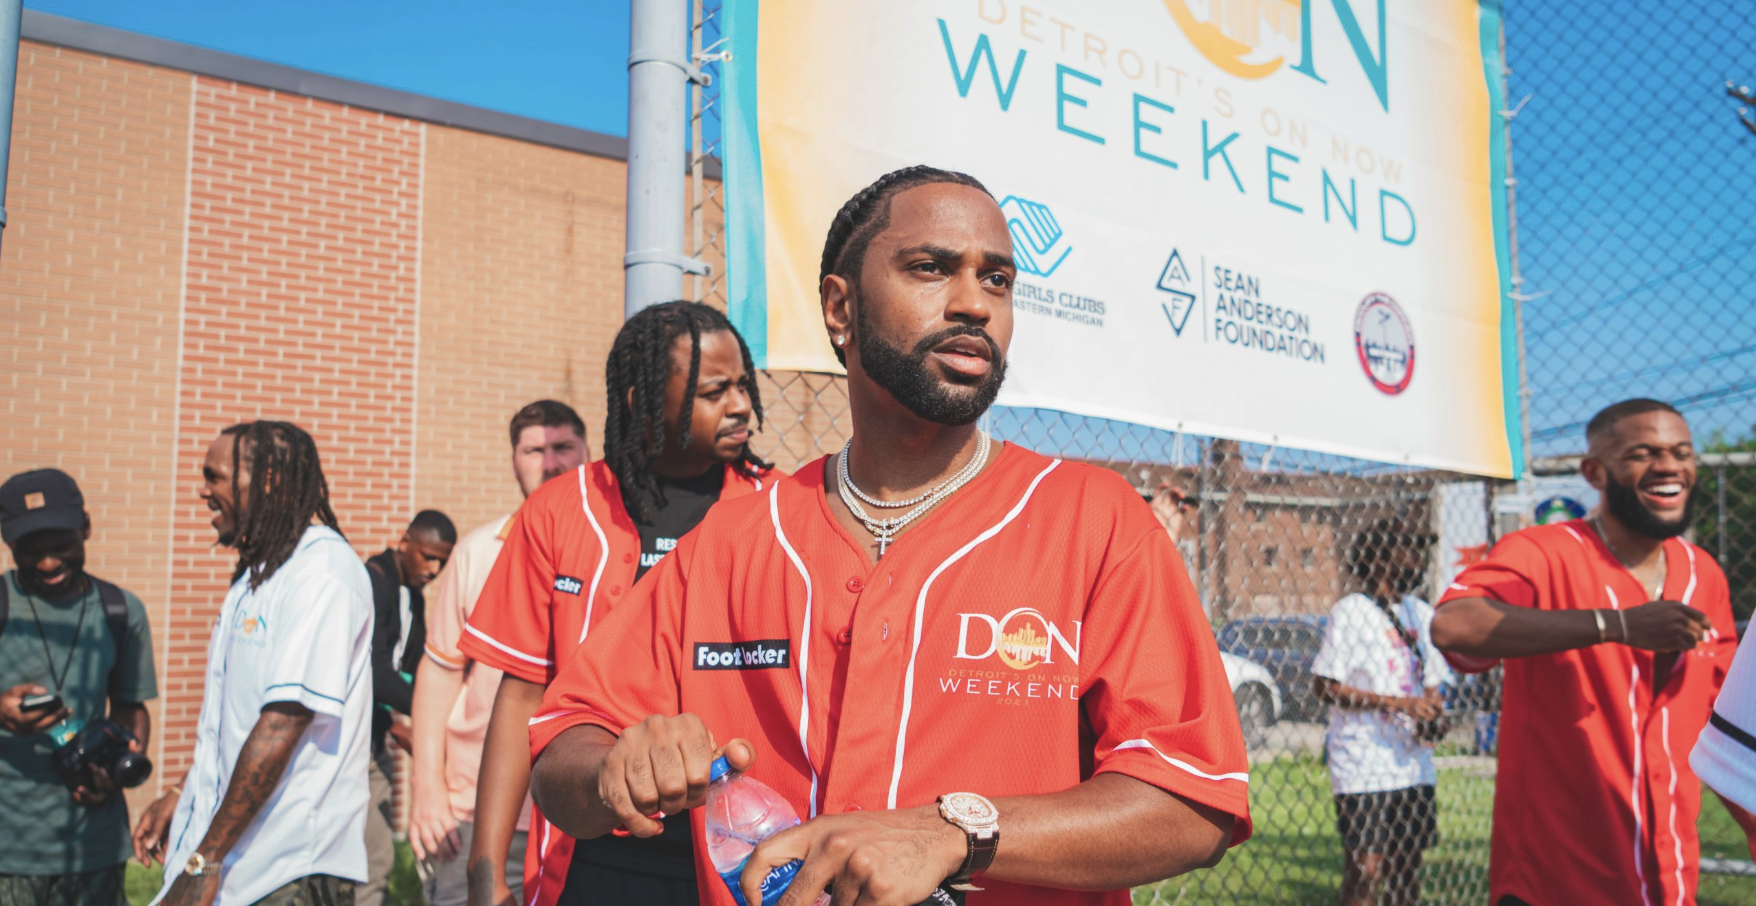 Big Sean Takes Over Detroit with Annual D.O.N Weekend!